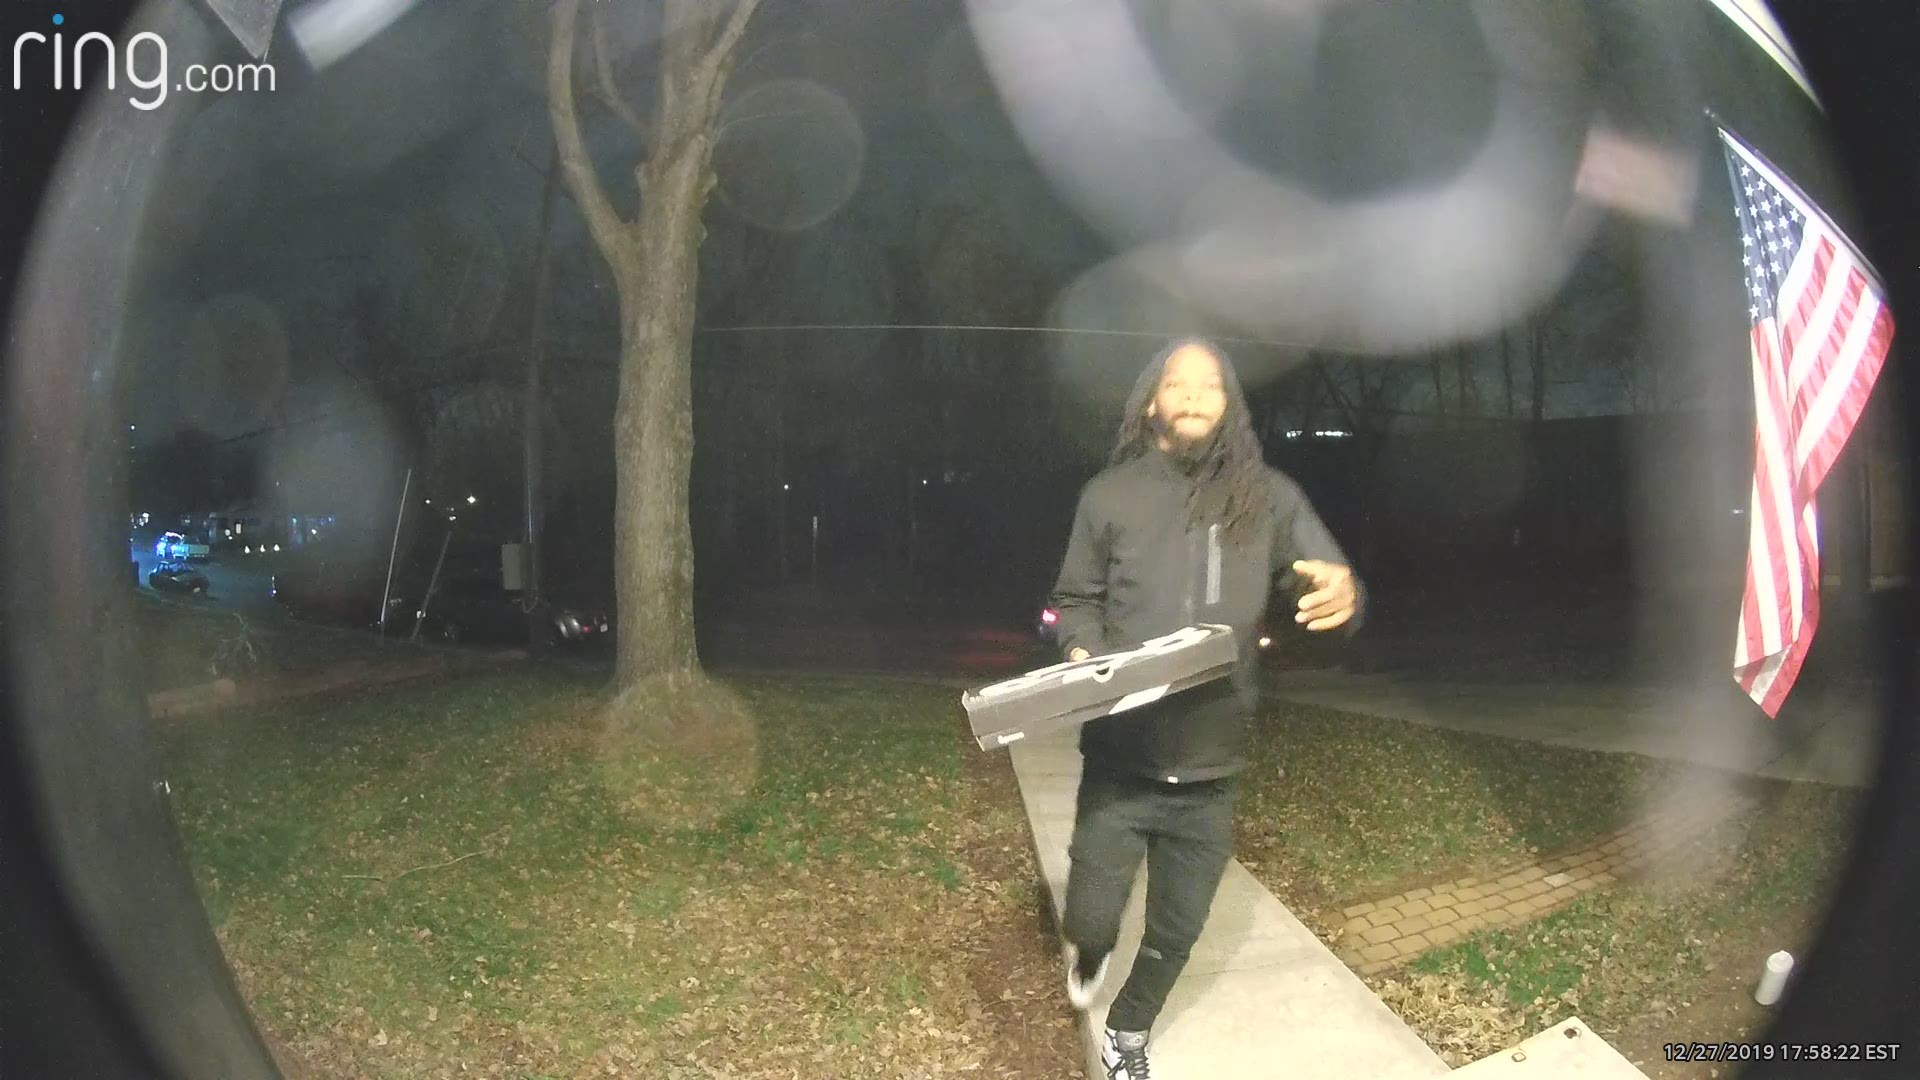 A DoorDash delivery man was caught on video stealing packages from a home in Alexadria, Virginia. Credit: Ken Prol